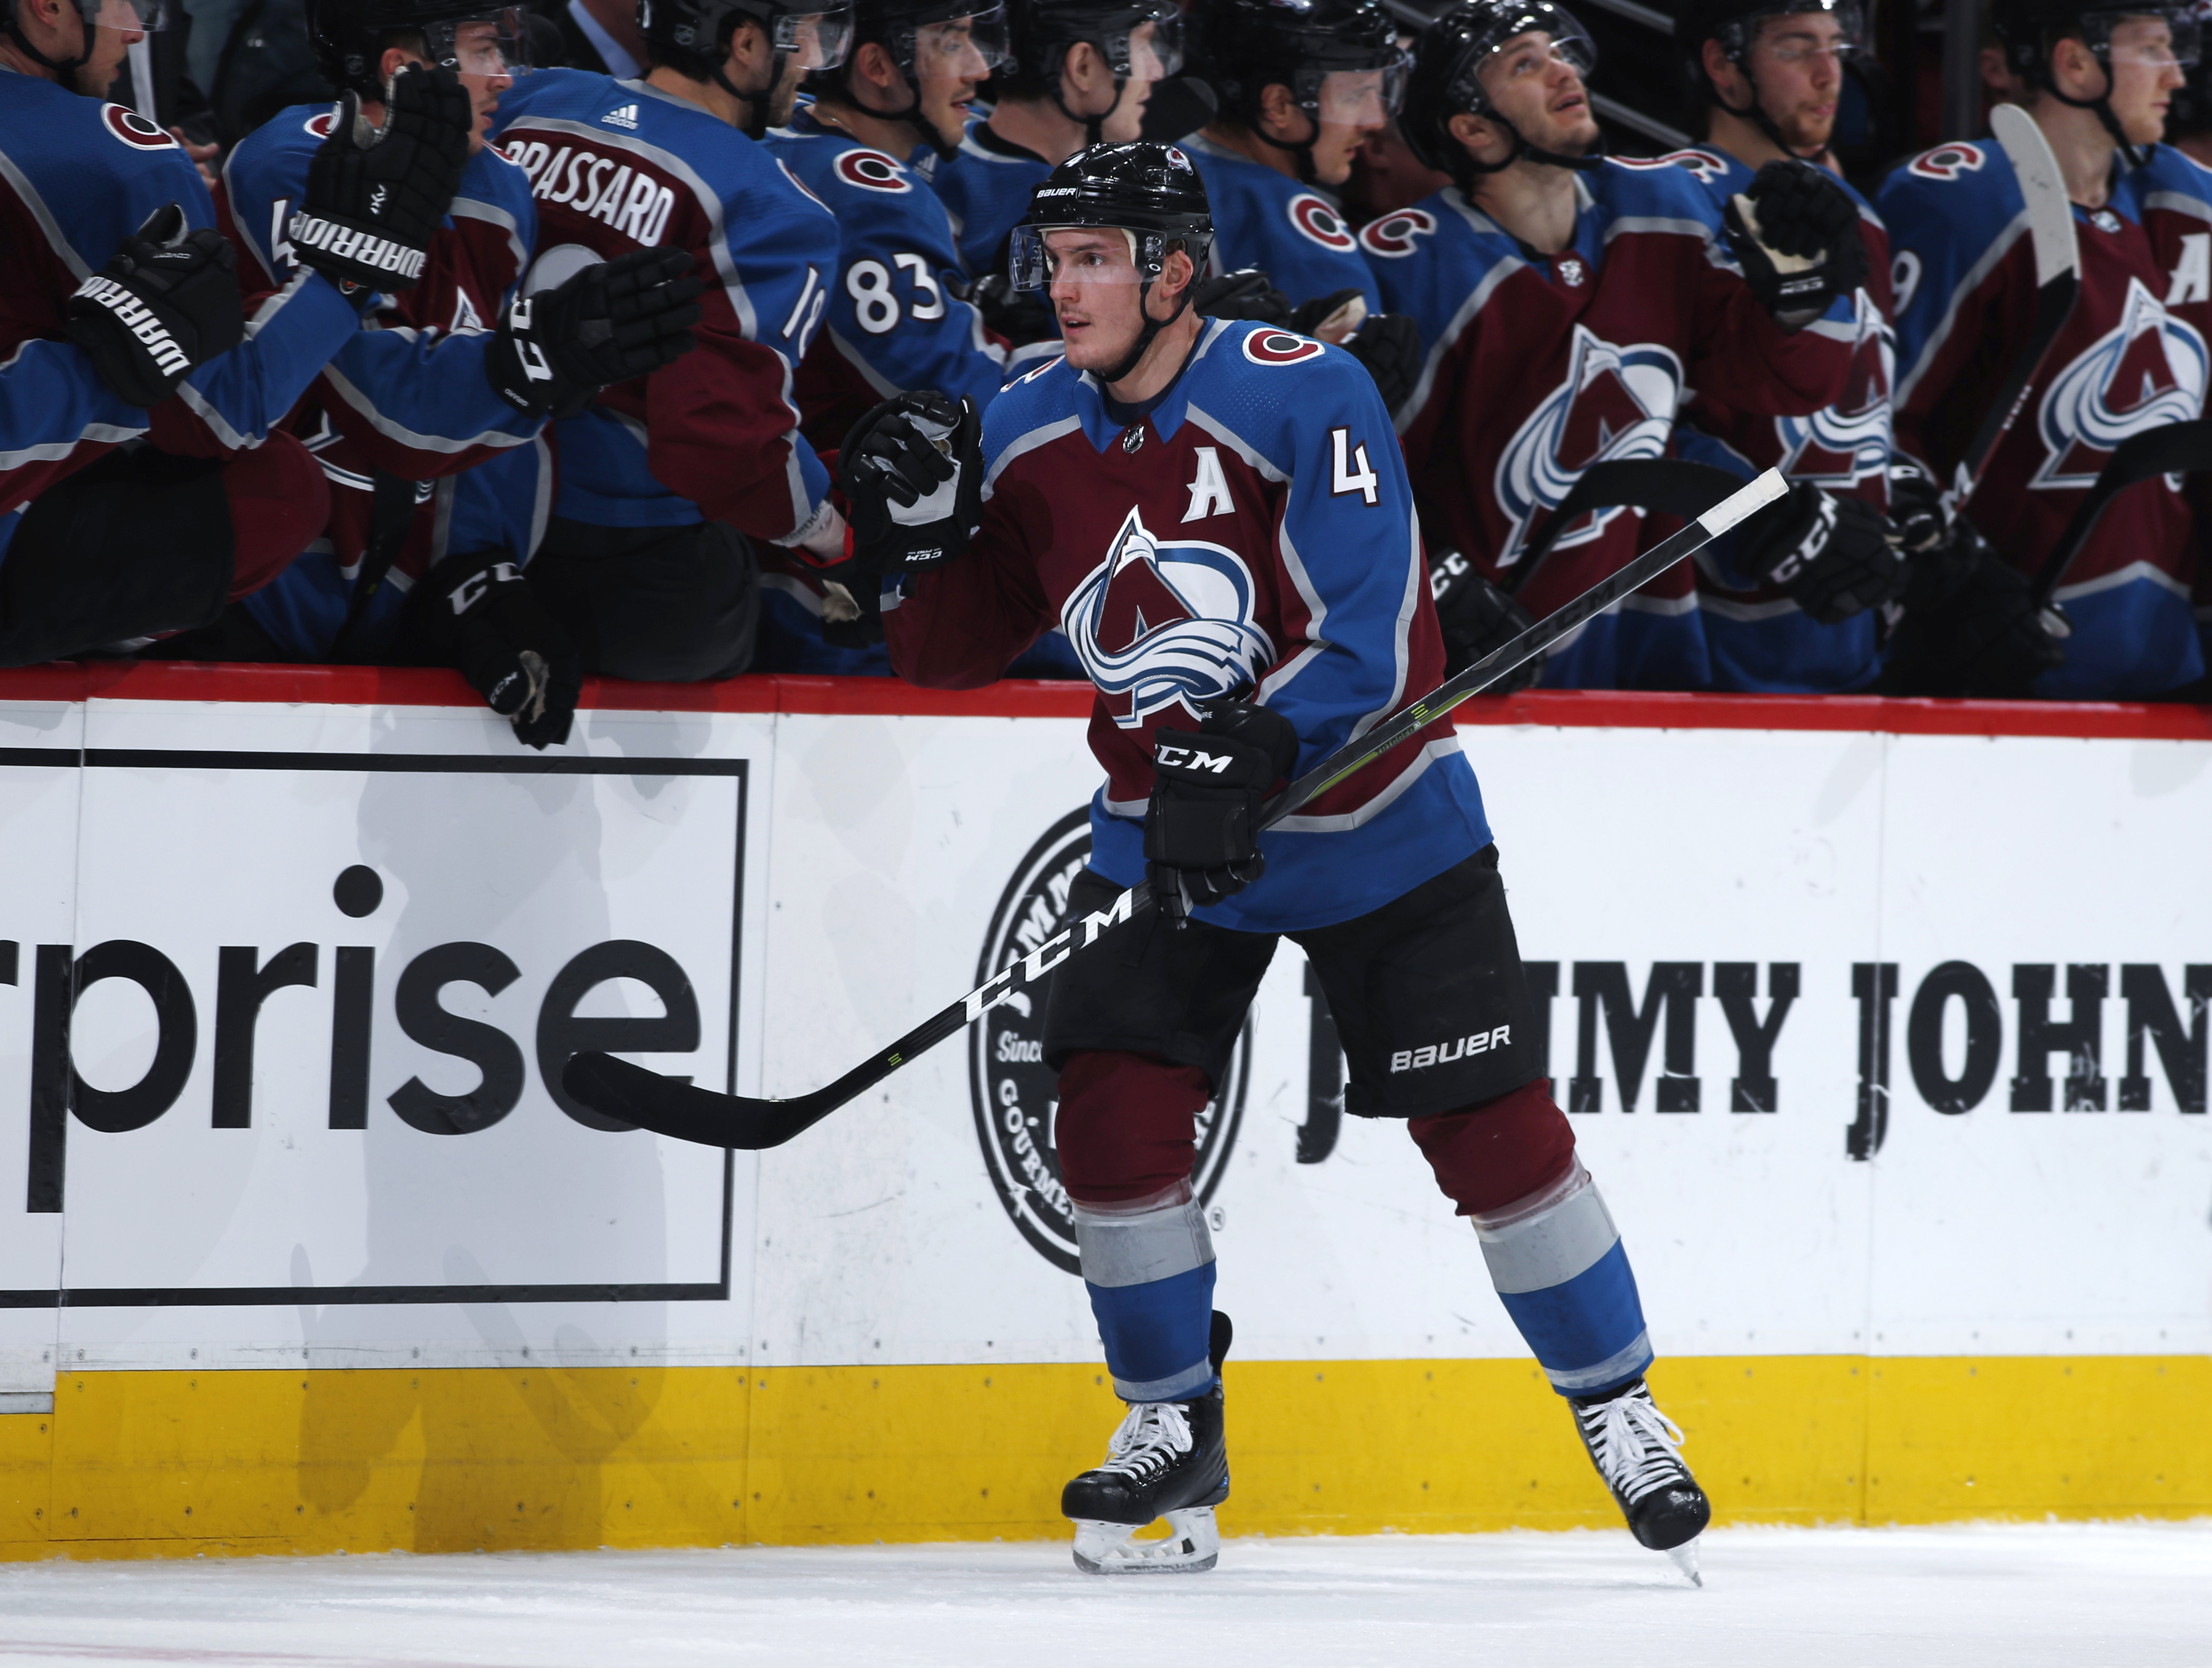 Barrie, Grubauer help Avs hold on for 4-3 win over Knights